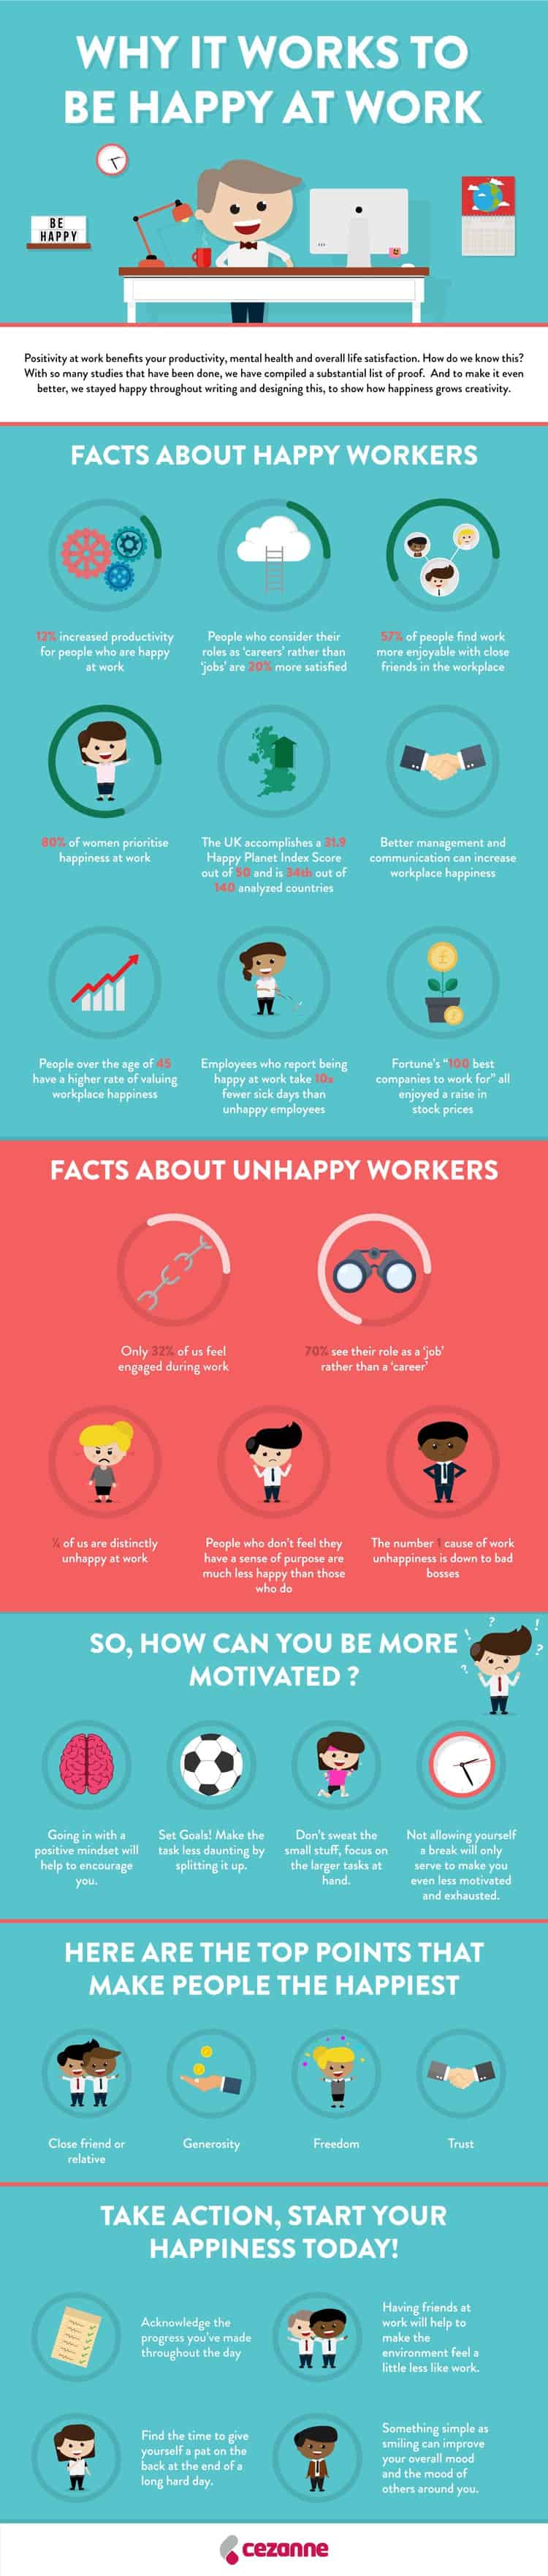 Why it works to be happy at work